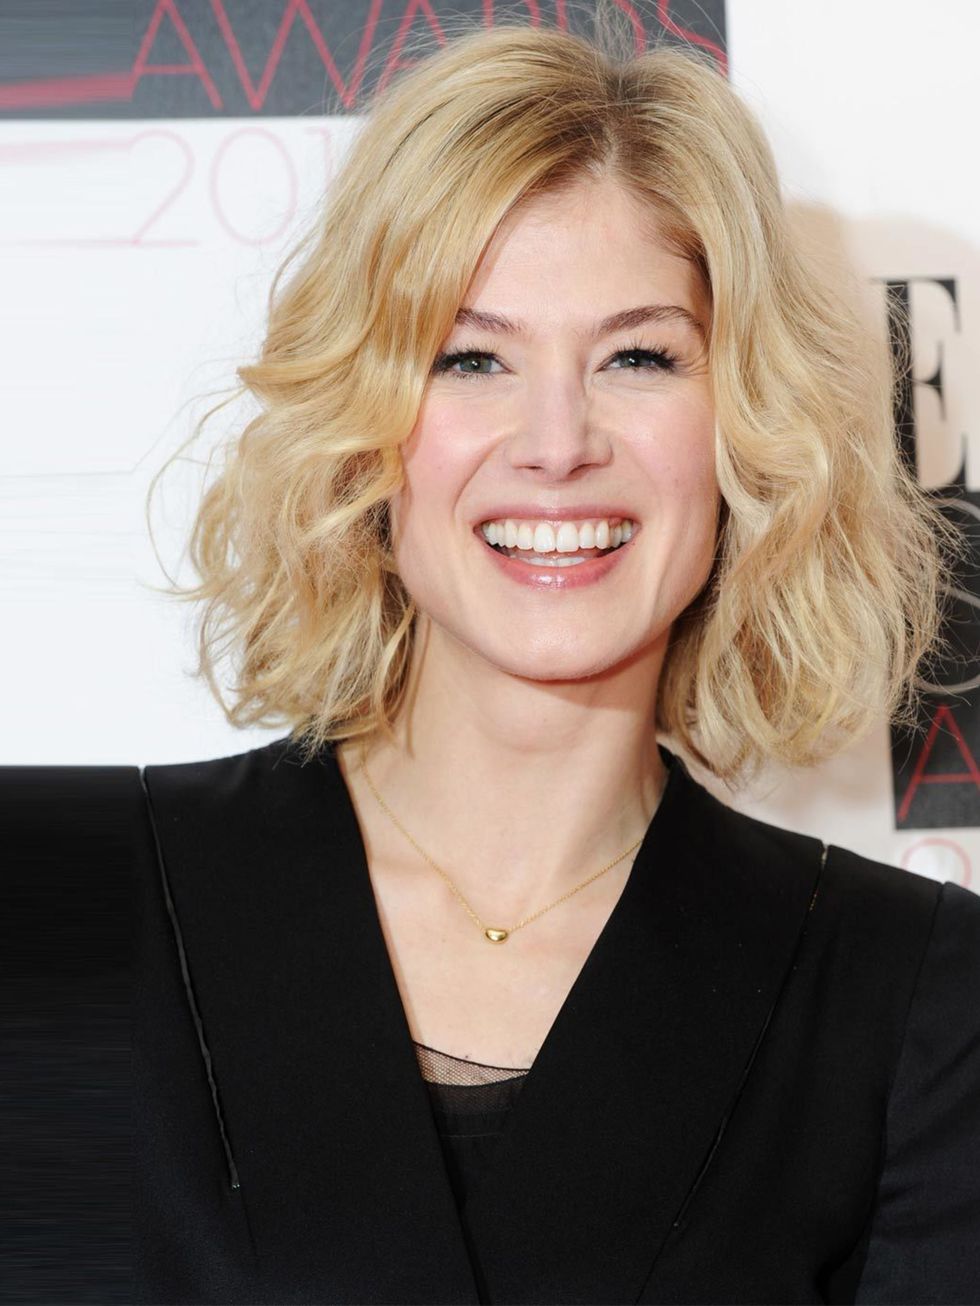 <p><a href="http://www.elleuk.com/star-style/celebrity-style-files/rosamun-pike">Rosamund Pike</a>, ELLE Style Awards 2013</p>